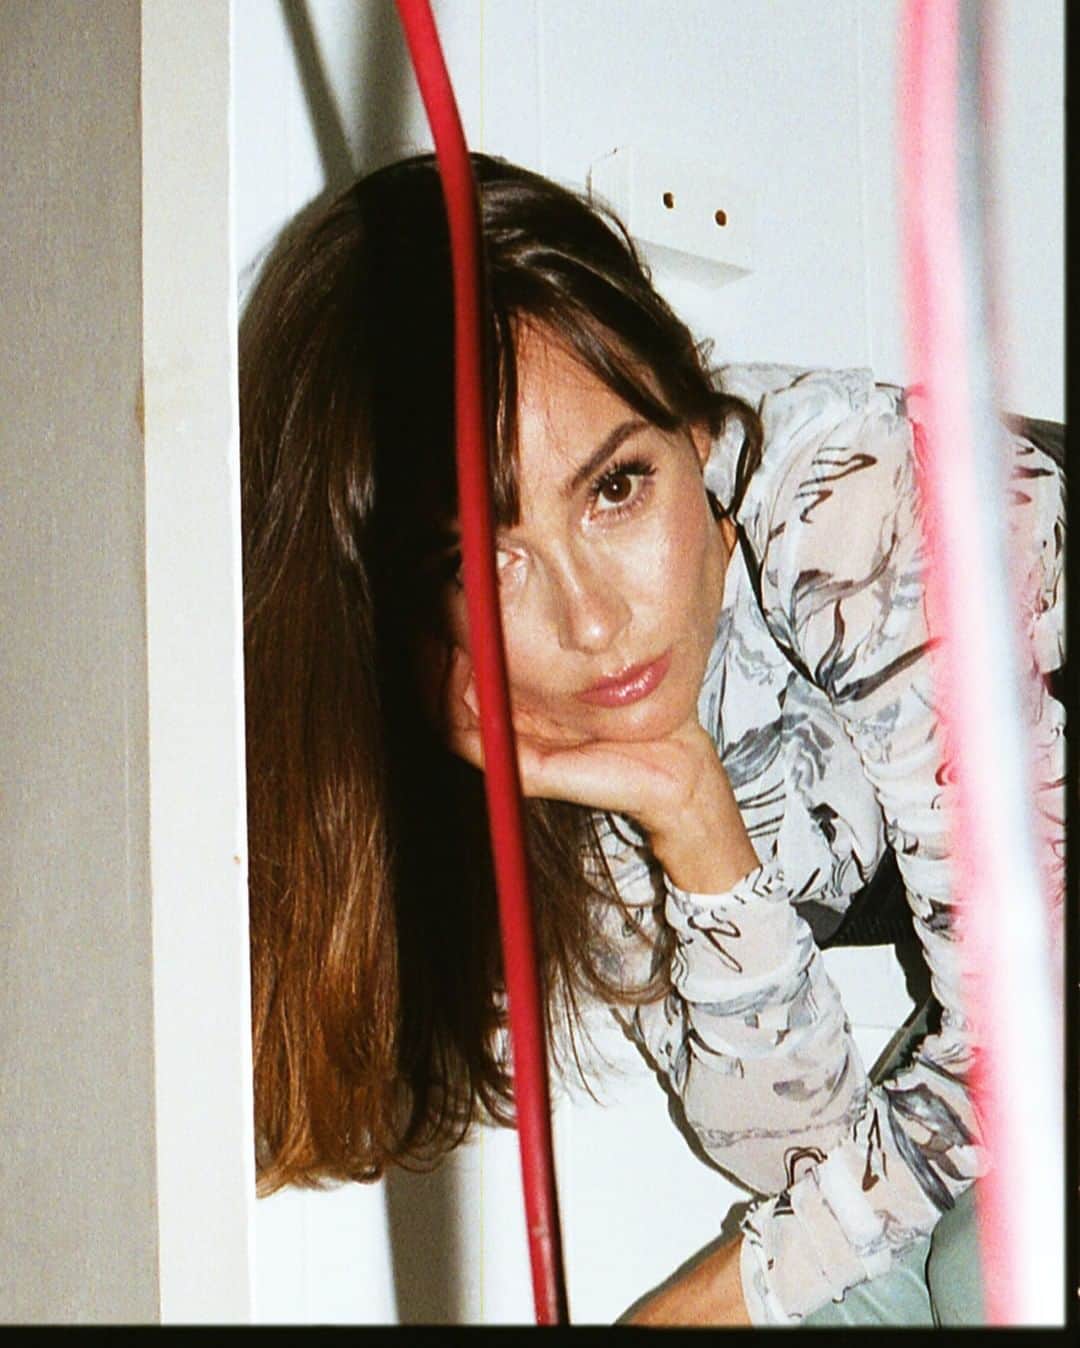 Flaunt Magazineさんのインスタグラム写真 - (Flaunt MagazineInstagram)「JOCELIN DONAHUE⠀⠀⠀⠀⠀⠀⠀⠀⠀ ⠀⠀⠀⠀⠀⠀⠀⠀⠀ @JocelinDonahue on her passion in the #horror genre: "One of the things I find empowering about working on horror films is being able to work with stunt coordinators, and I love that aspect of learning about self defense or martial arts or weapons."⠀⠀⠀⠀⠀⠀⠀⠀⠀ ⠀⠀⠀⠀⠀⠀⠀⠀⠀ Her film @doctorsleepmovie is currently in theaters, head to FLAUNT.com to read the interview. ⠀⠀⠀⠀⠀⠀⠀⠀⠀ ⠀⠀⠀⠀⠀⠀⠀⠀⠀ @DROME_official top and pants.⠀⠀⠀⠀⠀⠀⠀⠀⠀ ⠀⠀⠀⠀⠀⠀⠀⠀⠀ Photographed by Emil Ravelo | @emilravelo⠀⠀⠀⠀⠀⠀⠀⠀⠀ Styled by Sunzhique | @sunzhique⠀⠀⠀⠀⠀⠀⠀⠀⠀ Hair and Makeup: Dee Daly | @deedaly1⠀⠀⠀⠀⠀⠀⠀⠀⠀ Written and Produced by: BJ Panda Bear | @bjpandabear」11月22日 8時42分 - flauntmagazine